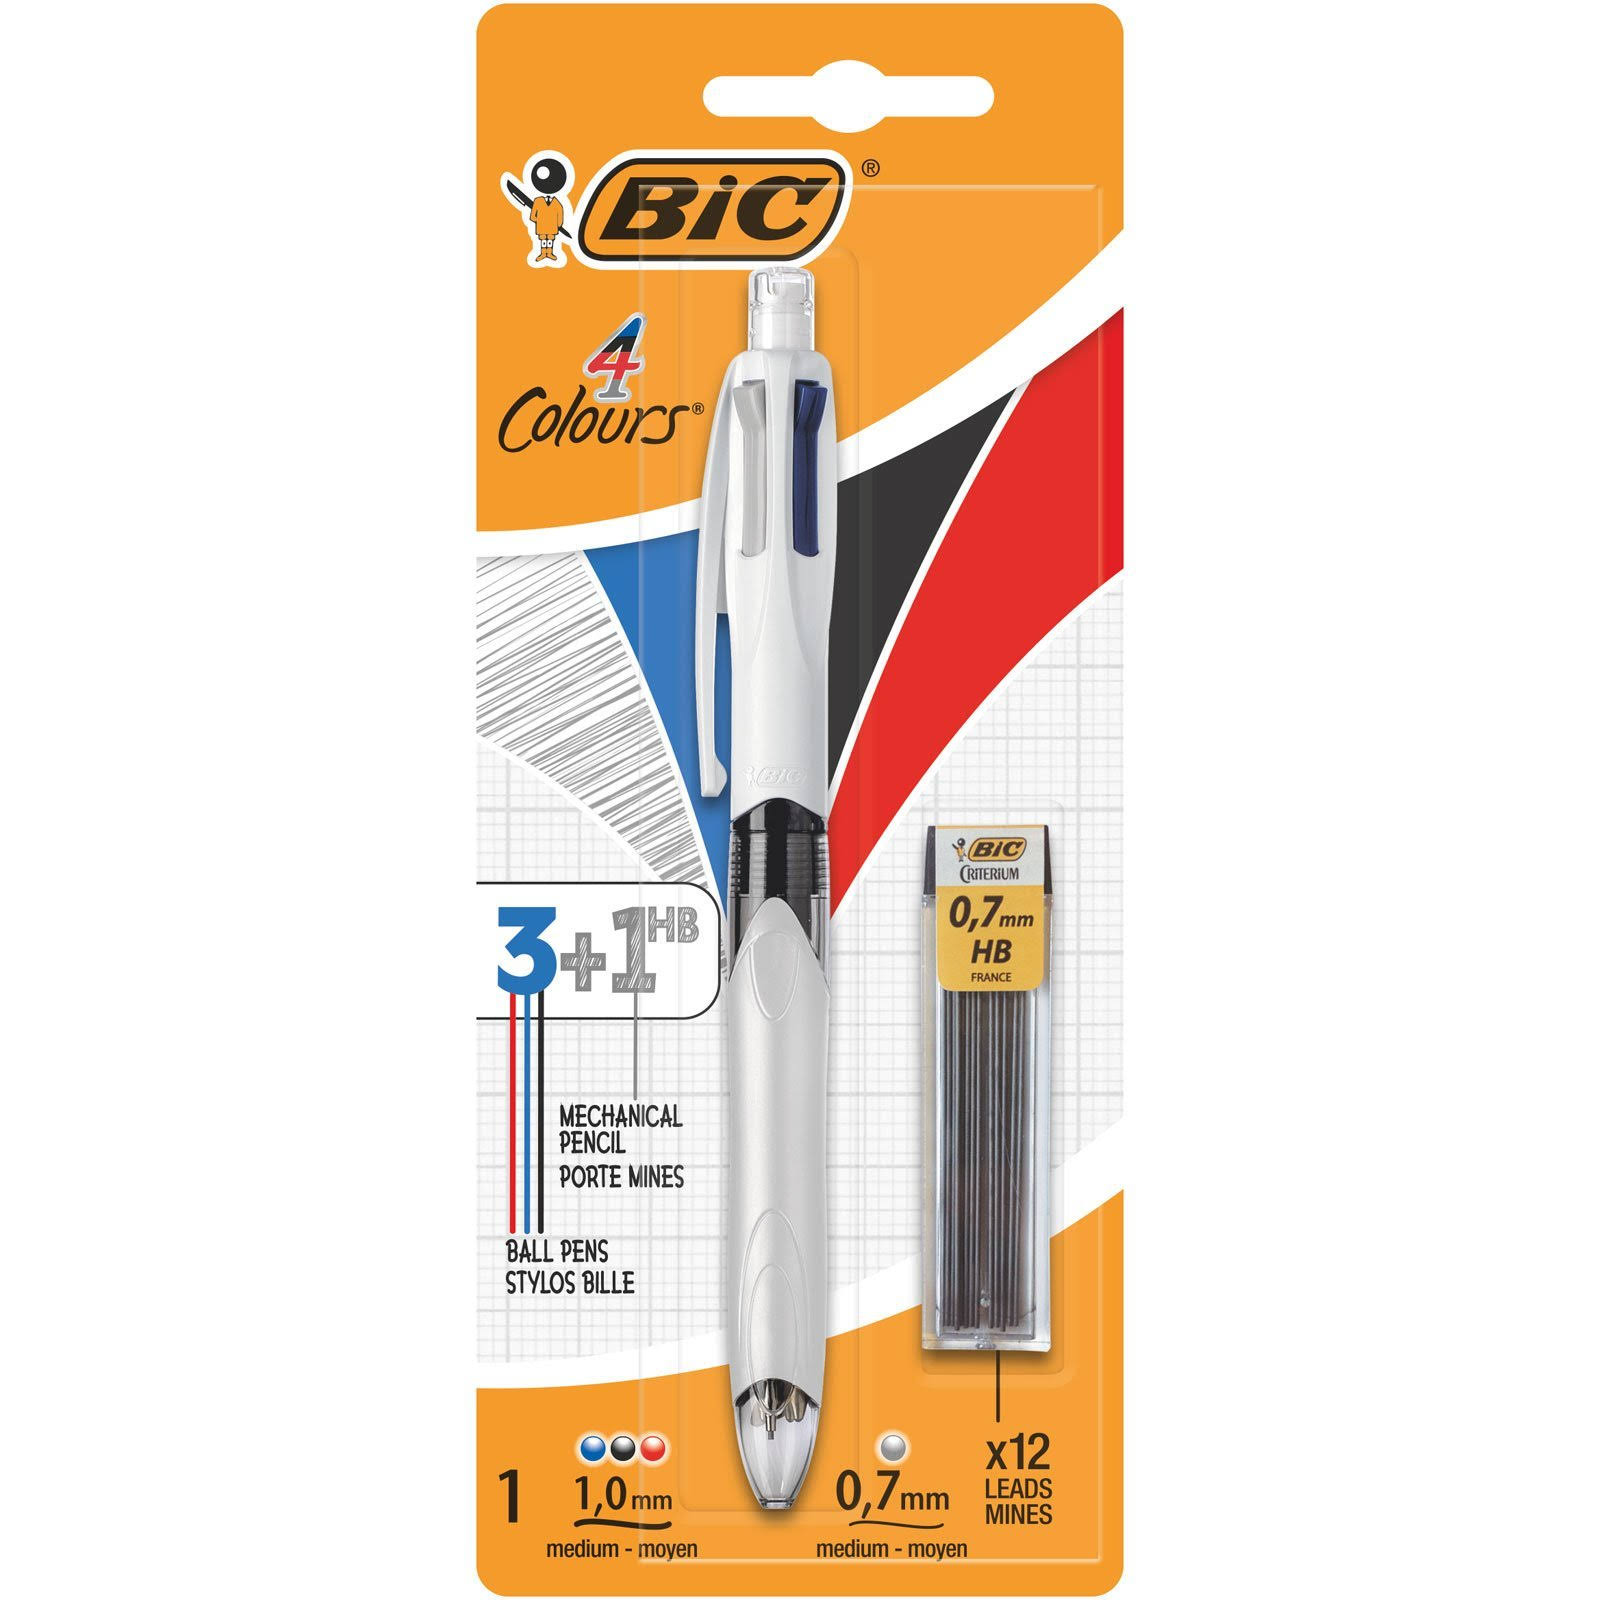 Bic 4 Colours Ballpoint Pen and HB Pencil